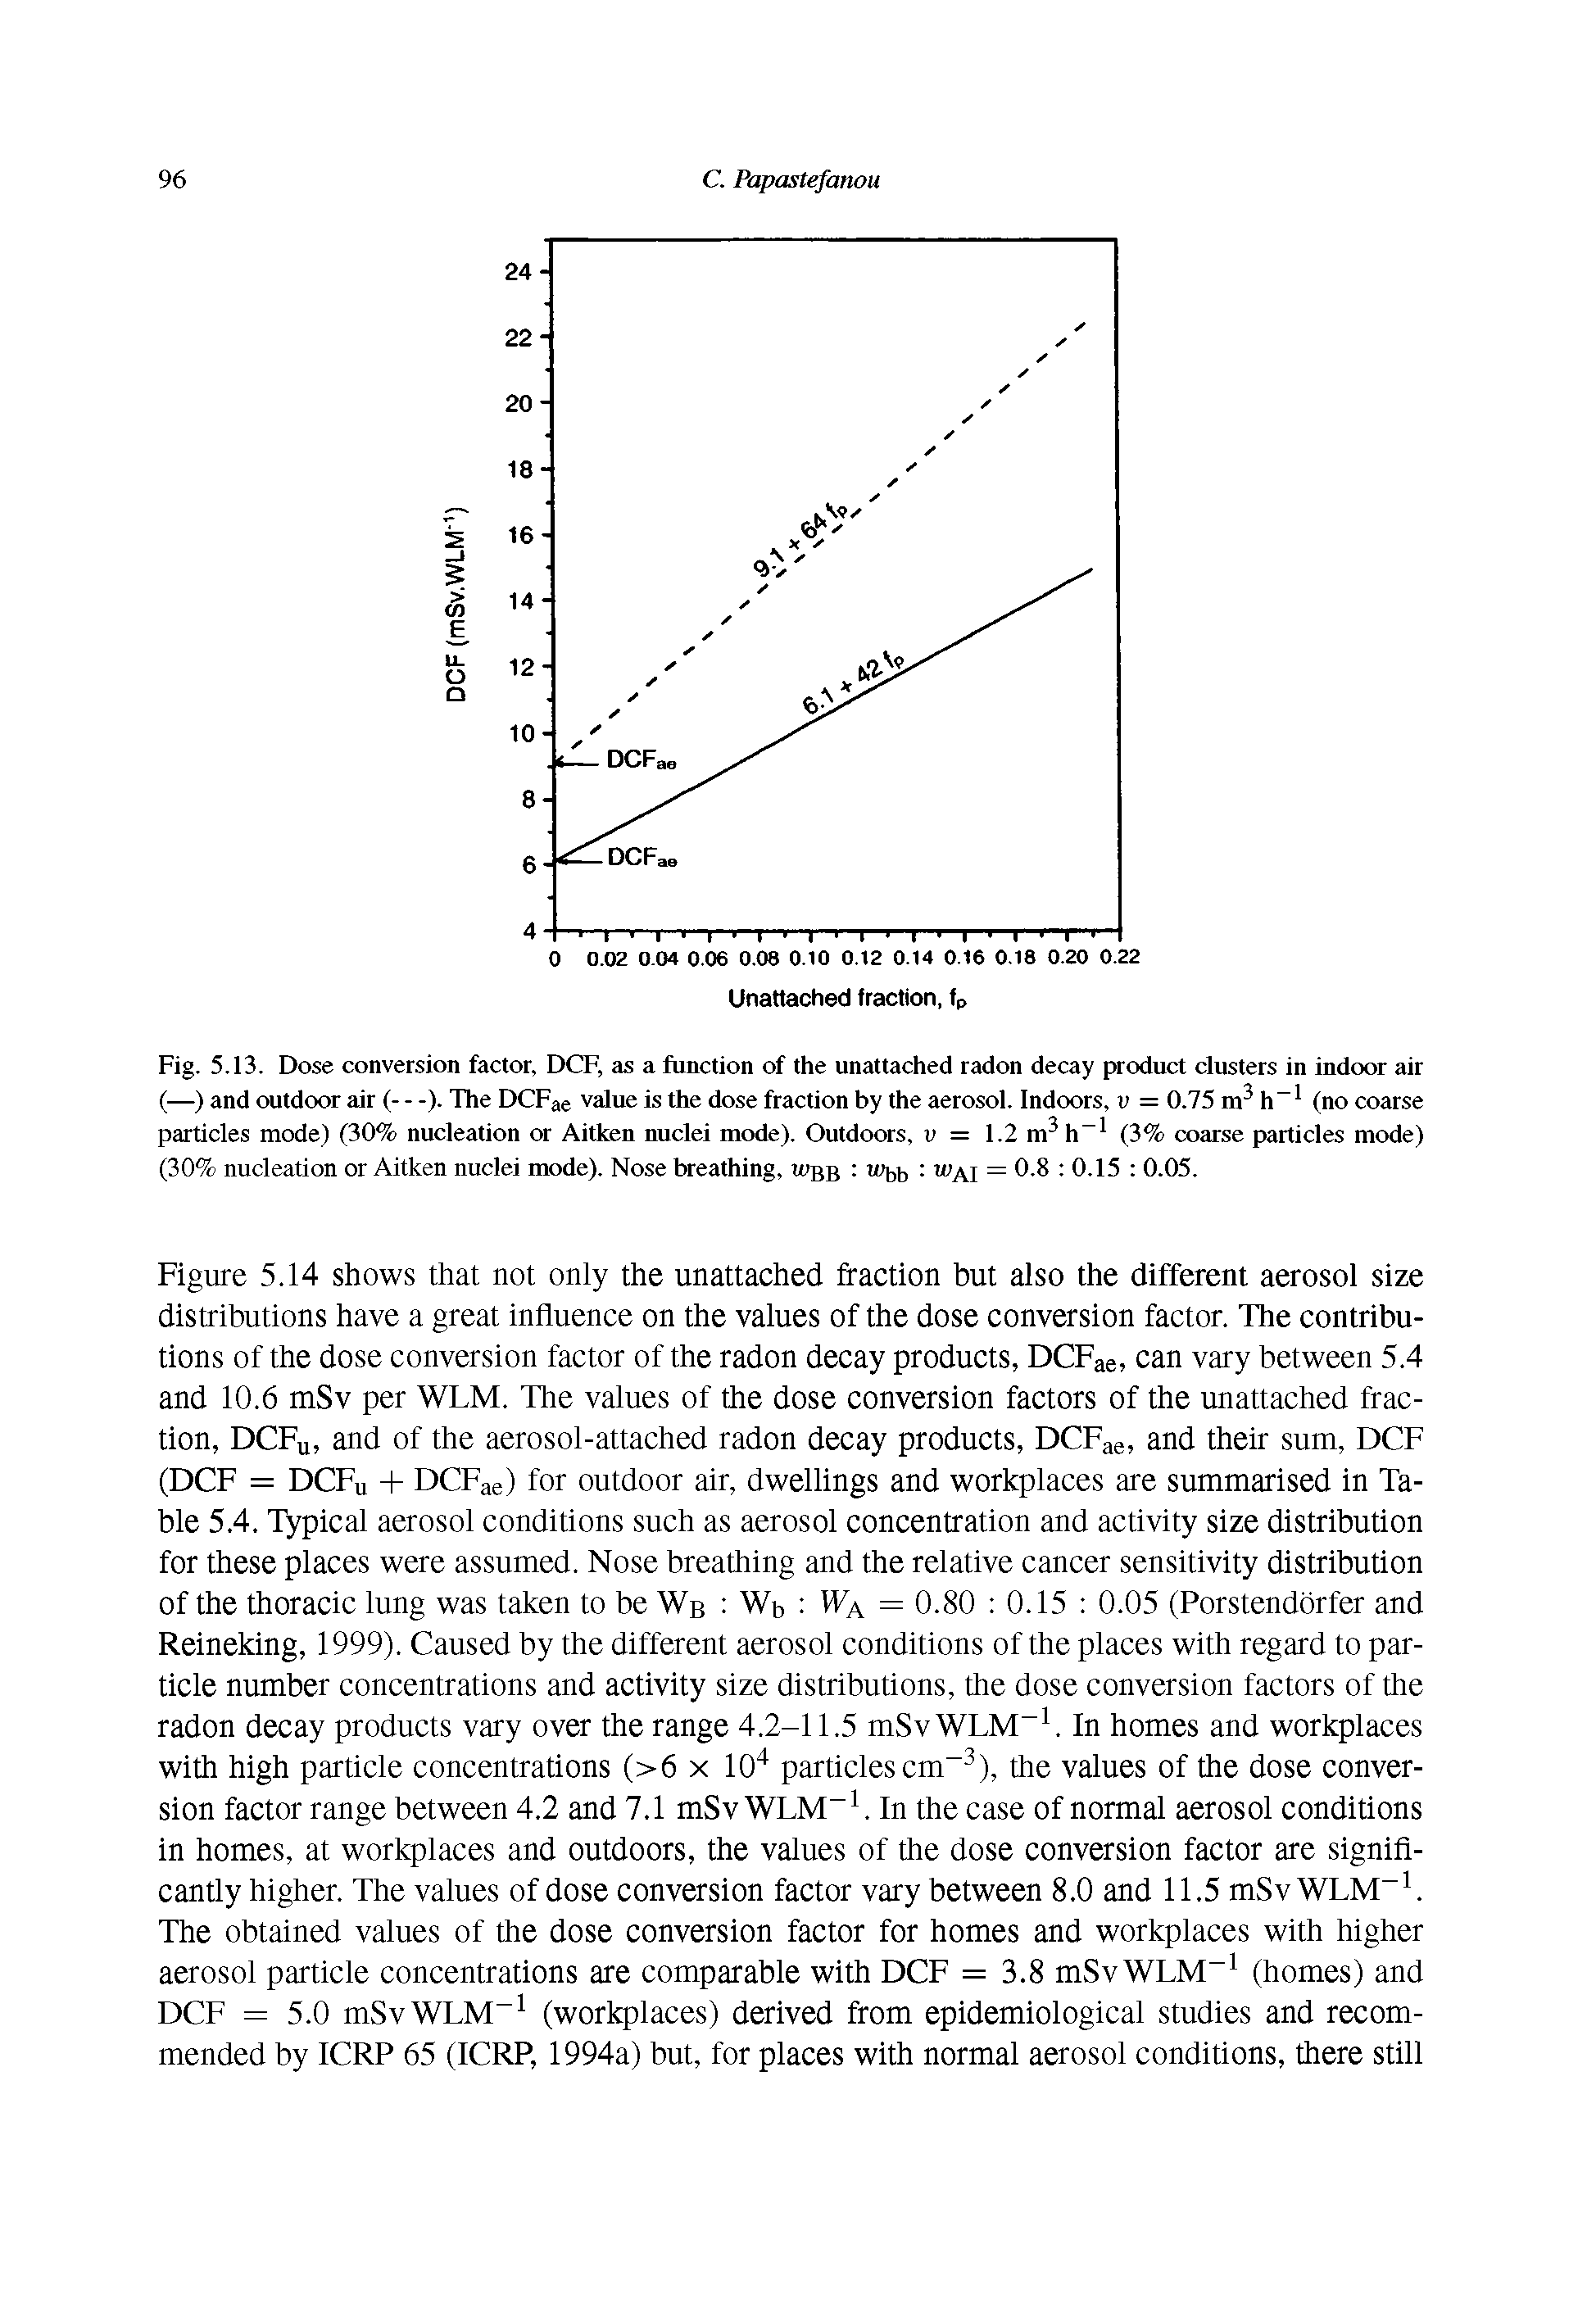 Fig. 5.13. Dose conversion factor, DCF, as a function of the unattached radon decay product clusters in indoor air (—) and outdoor air (—). The DCFae value is the dose fraction by the aerosol. Indoors, v = 0.75 h (no coarse...